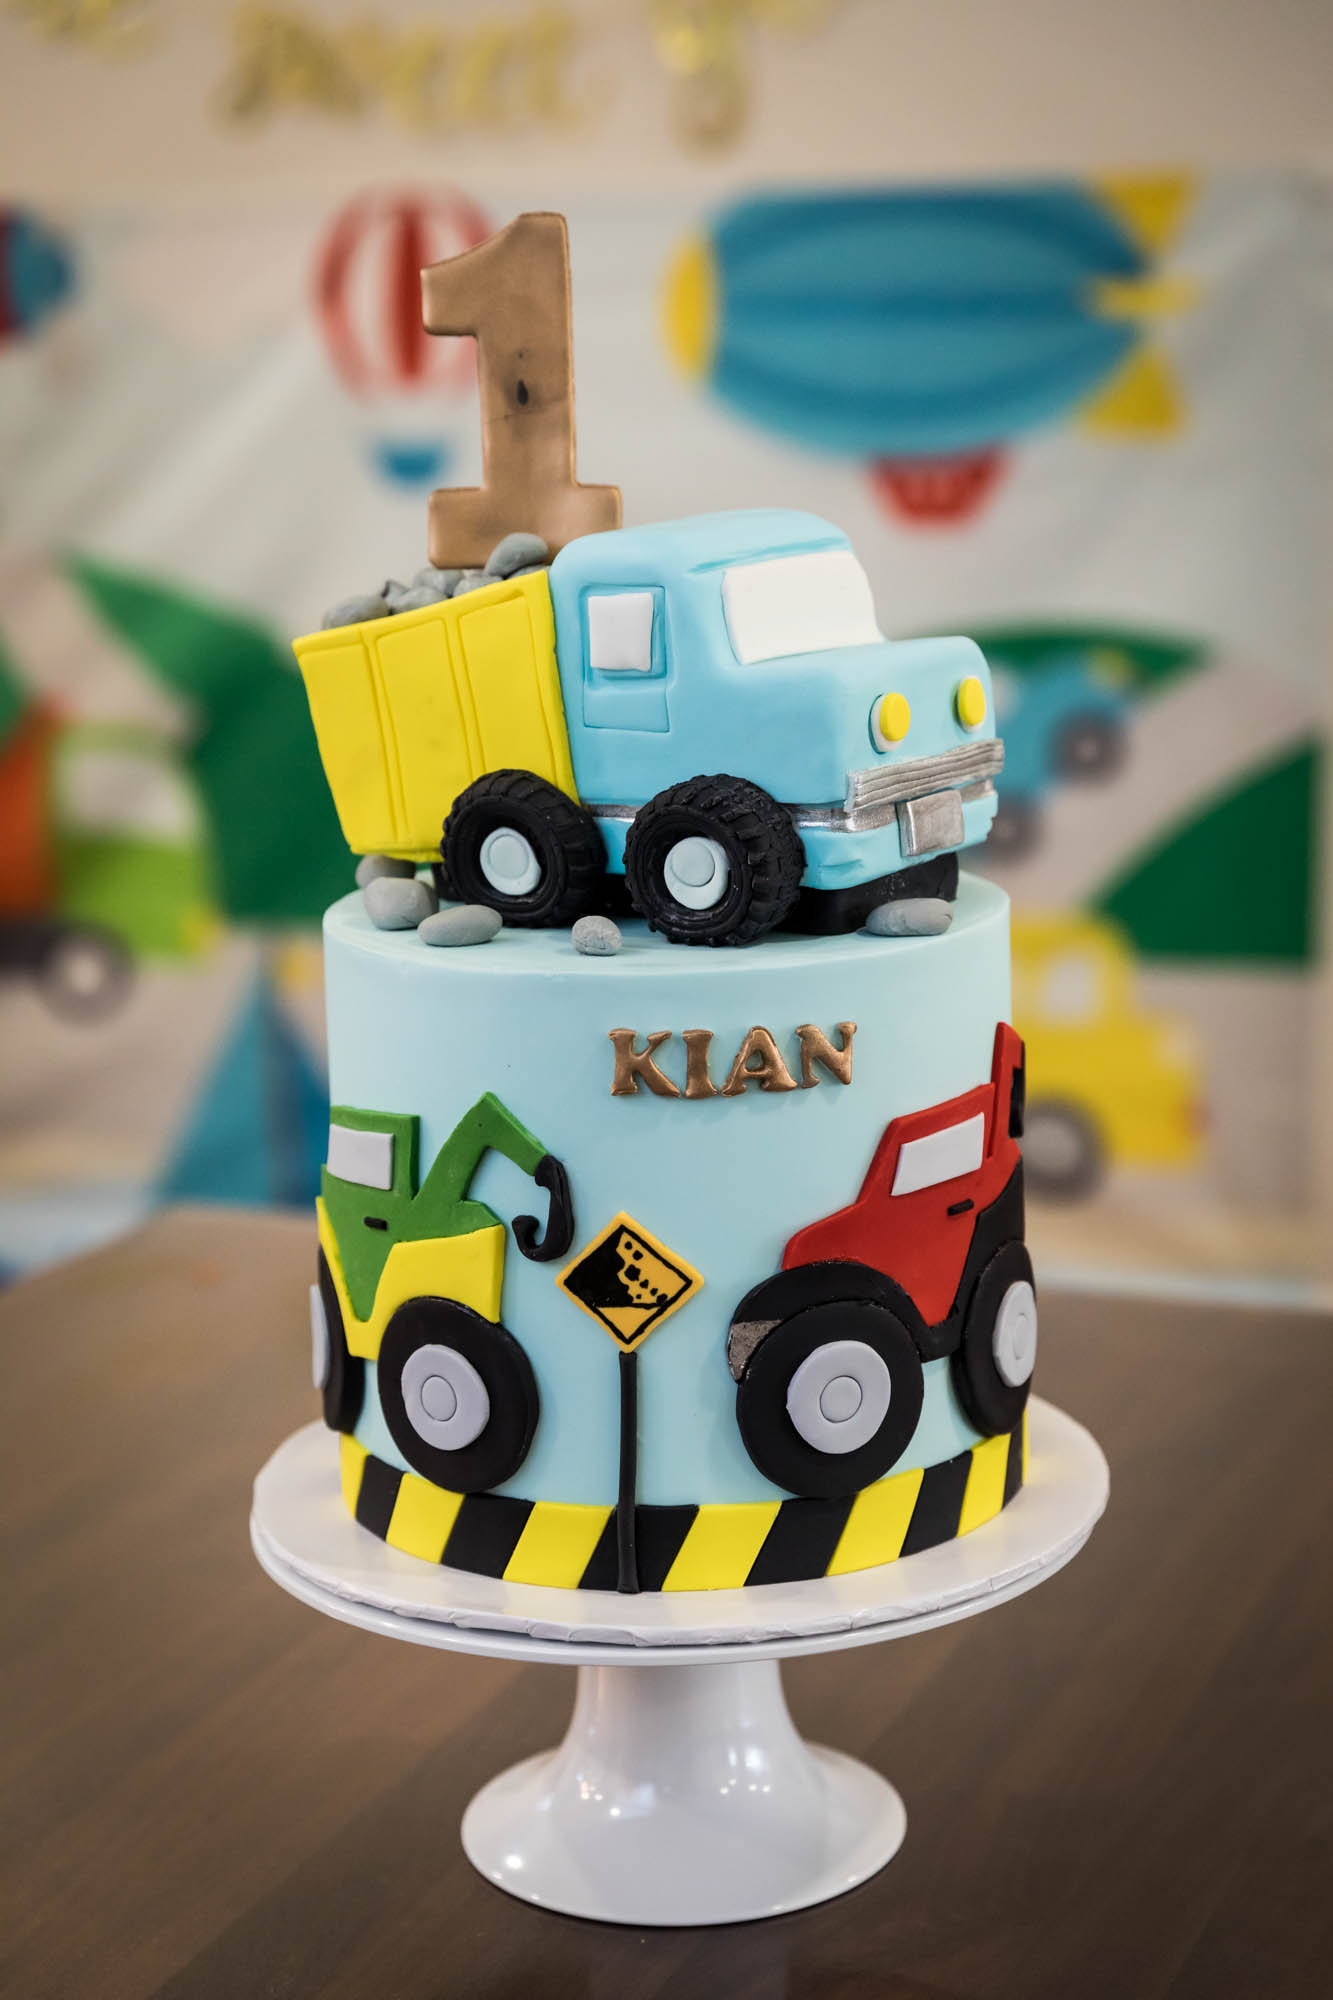 Truck-themed, colorful cake sitting on pedestal on wooden table